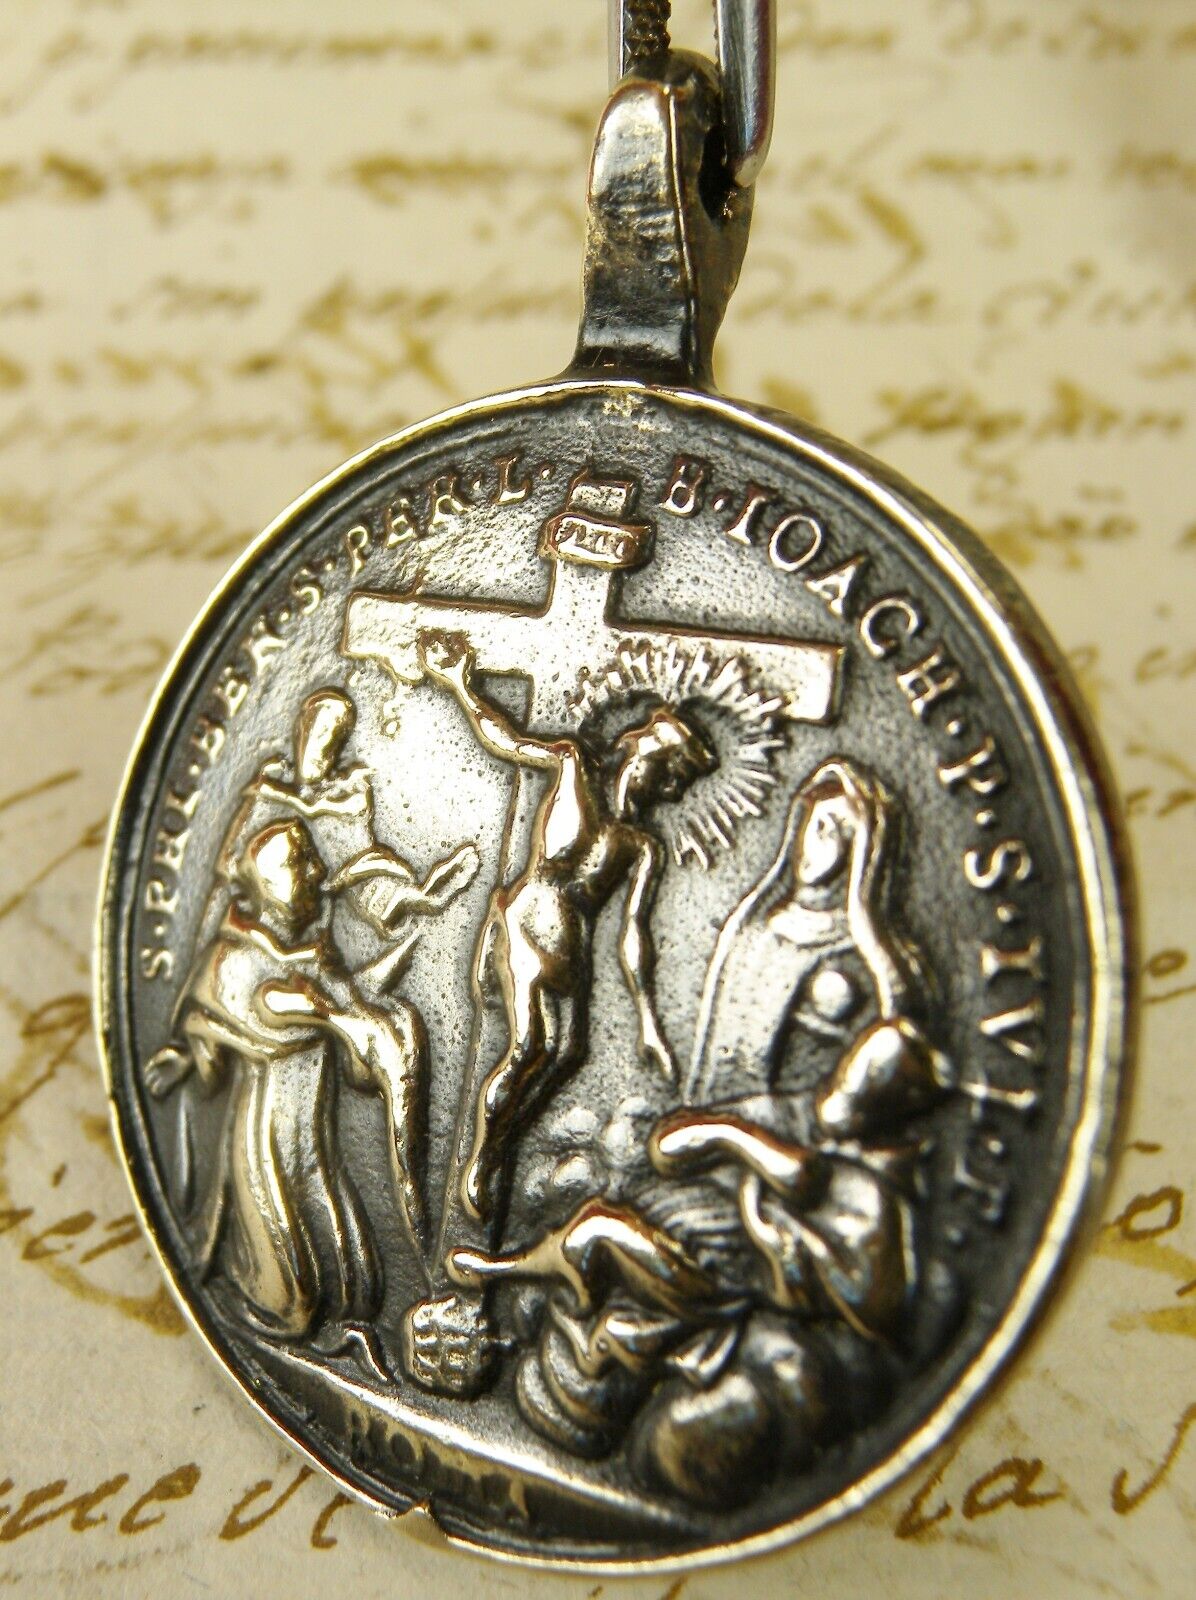 CARMELITE NUN ANTIQUE 18TH C. PASSION OF CHRIST OUR LADY OF SORROWS BRONZE MEDAL